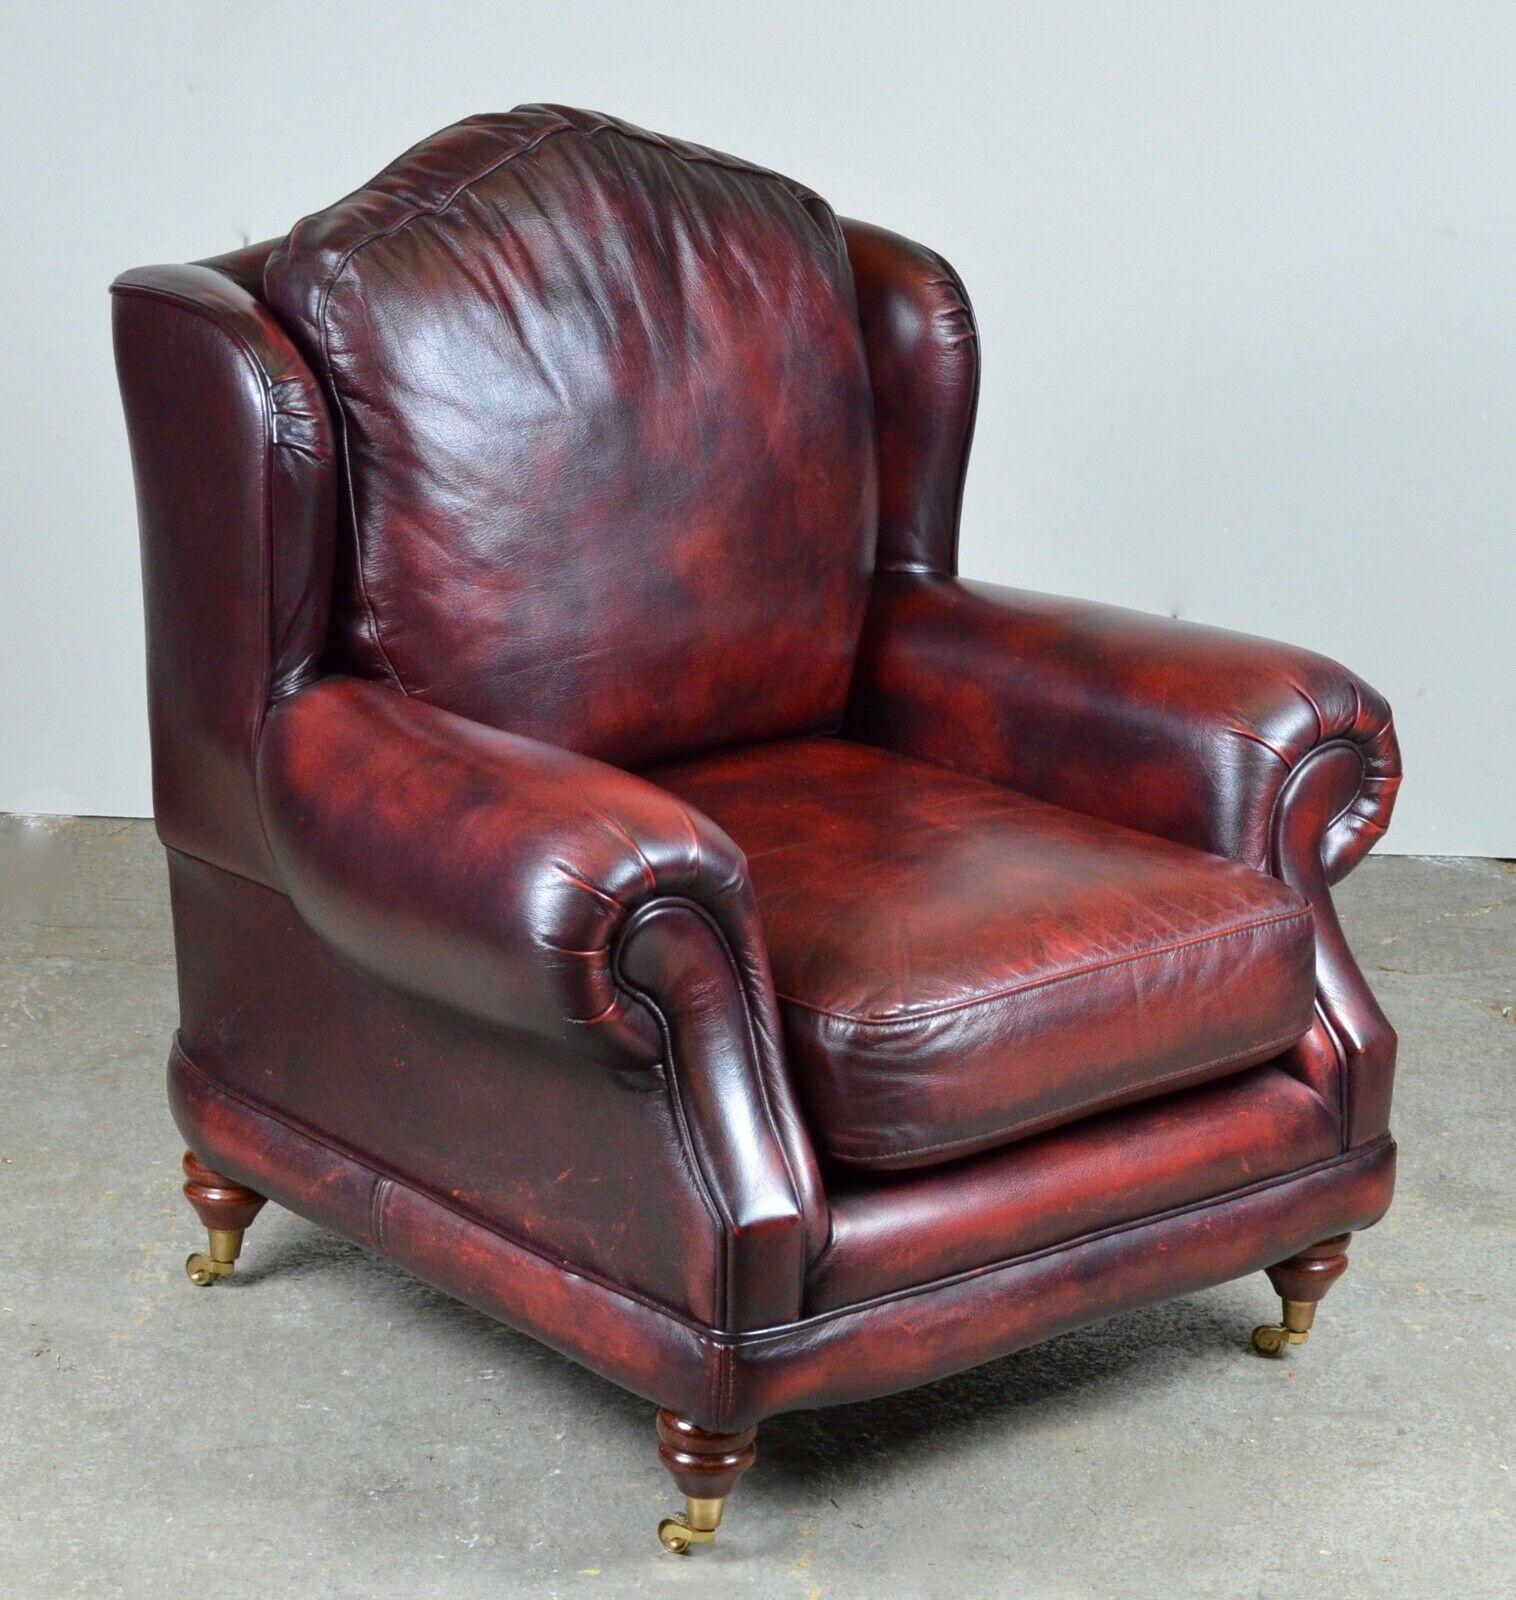 We are delighted to offer for sale this beautiful top-quality Thomas Lloyd armchair. It features an English roll arm and smooth high back and seat cushions providing ultimate comfort. It is in excellent condition and looks like new.

We also have